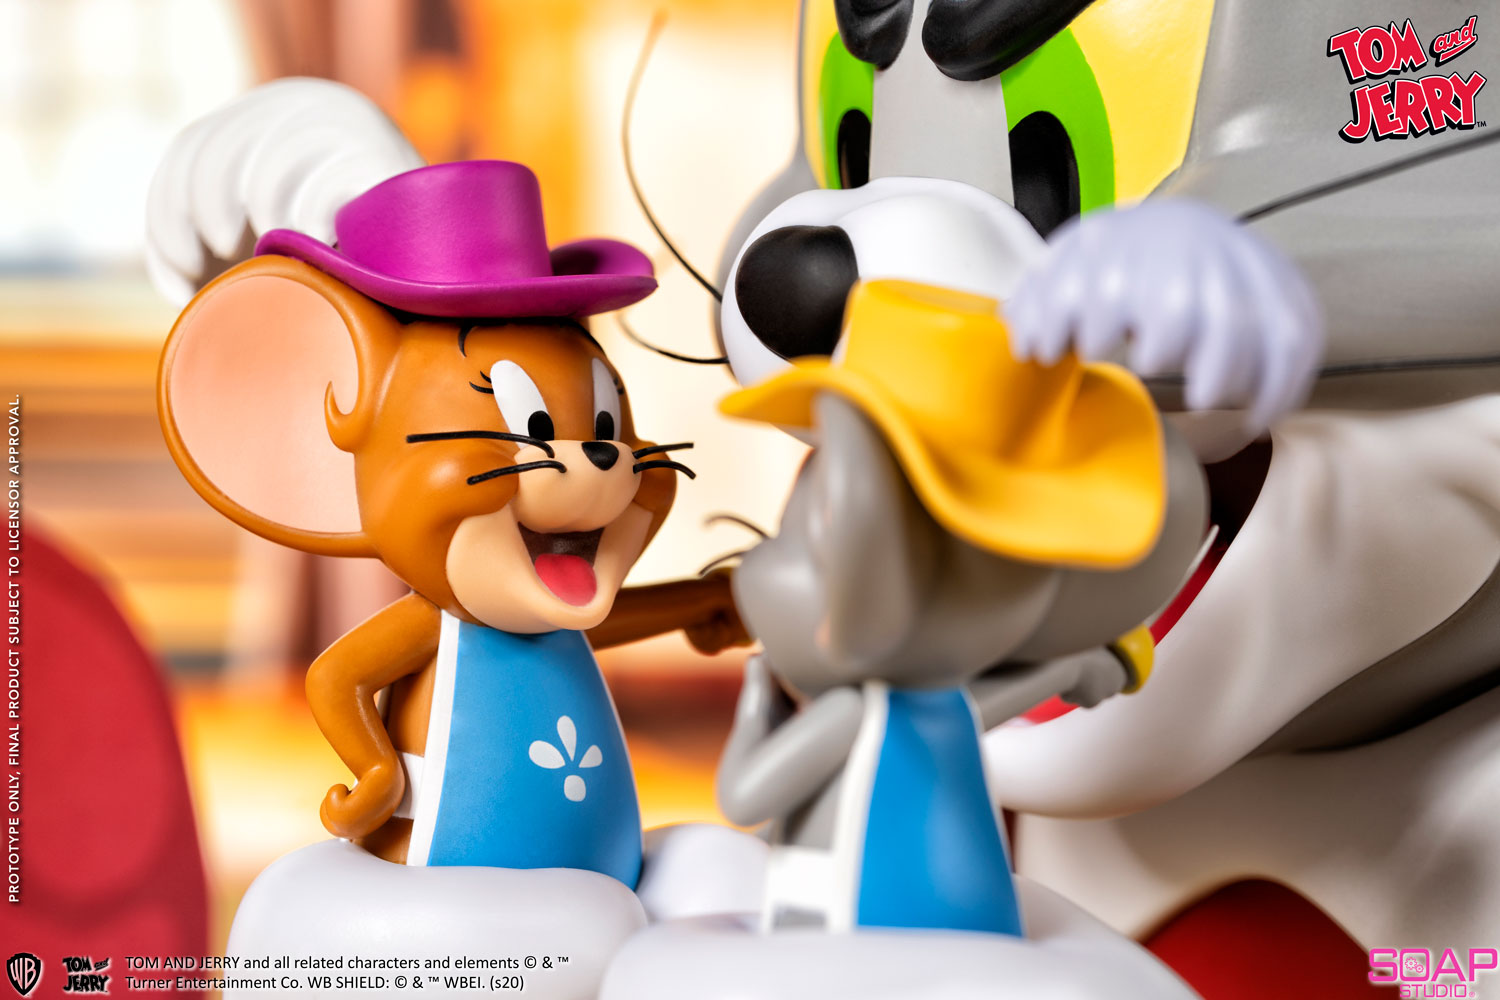 Soap Studio - Tom and Jerry - Tom & The Two Musketeers Bust - Marvelous Toys